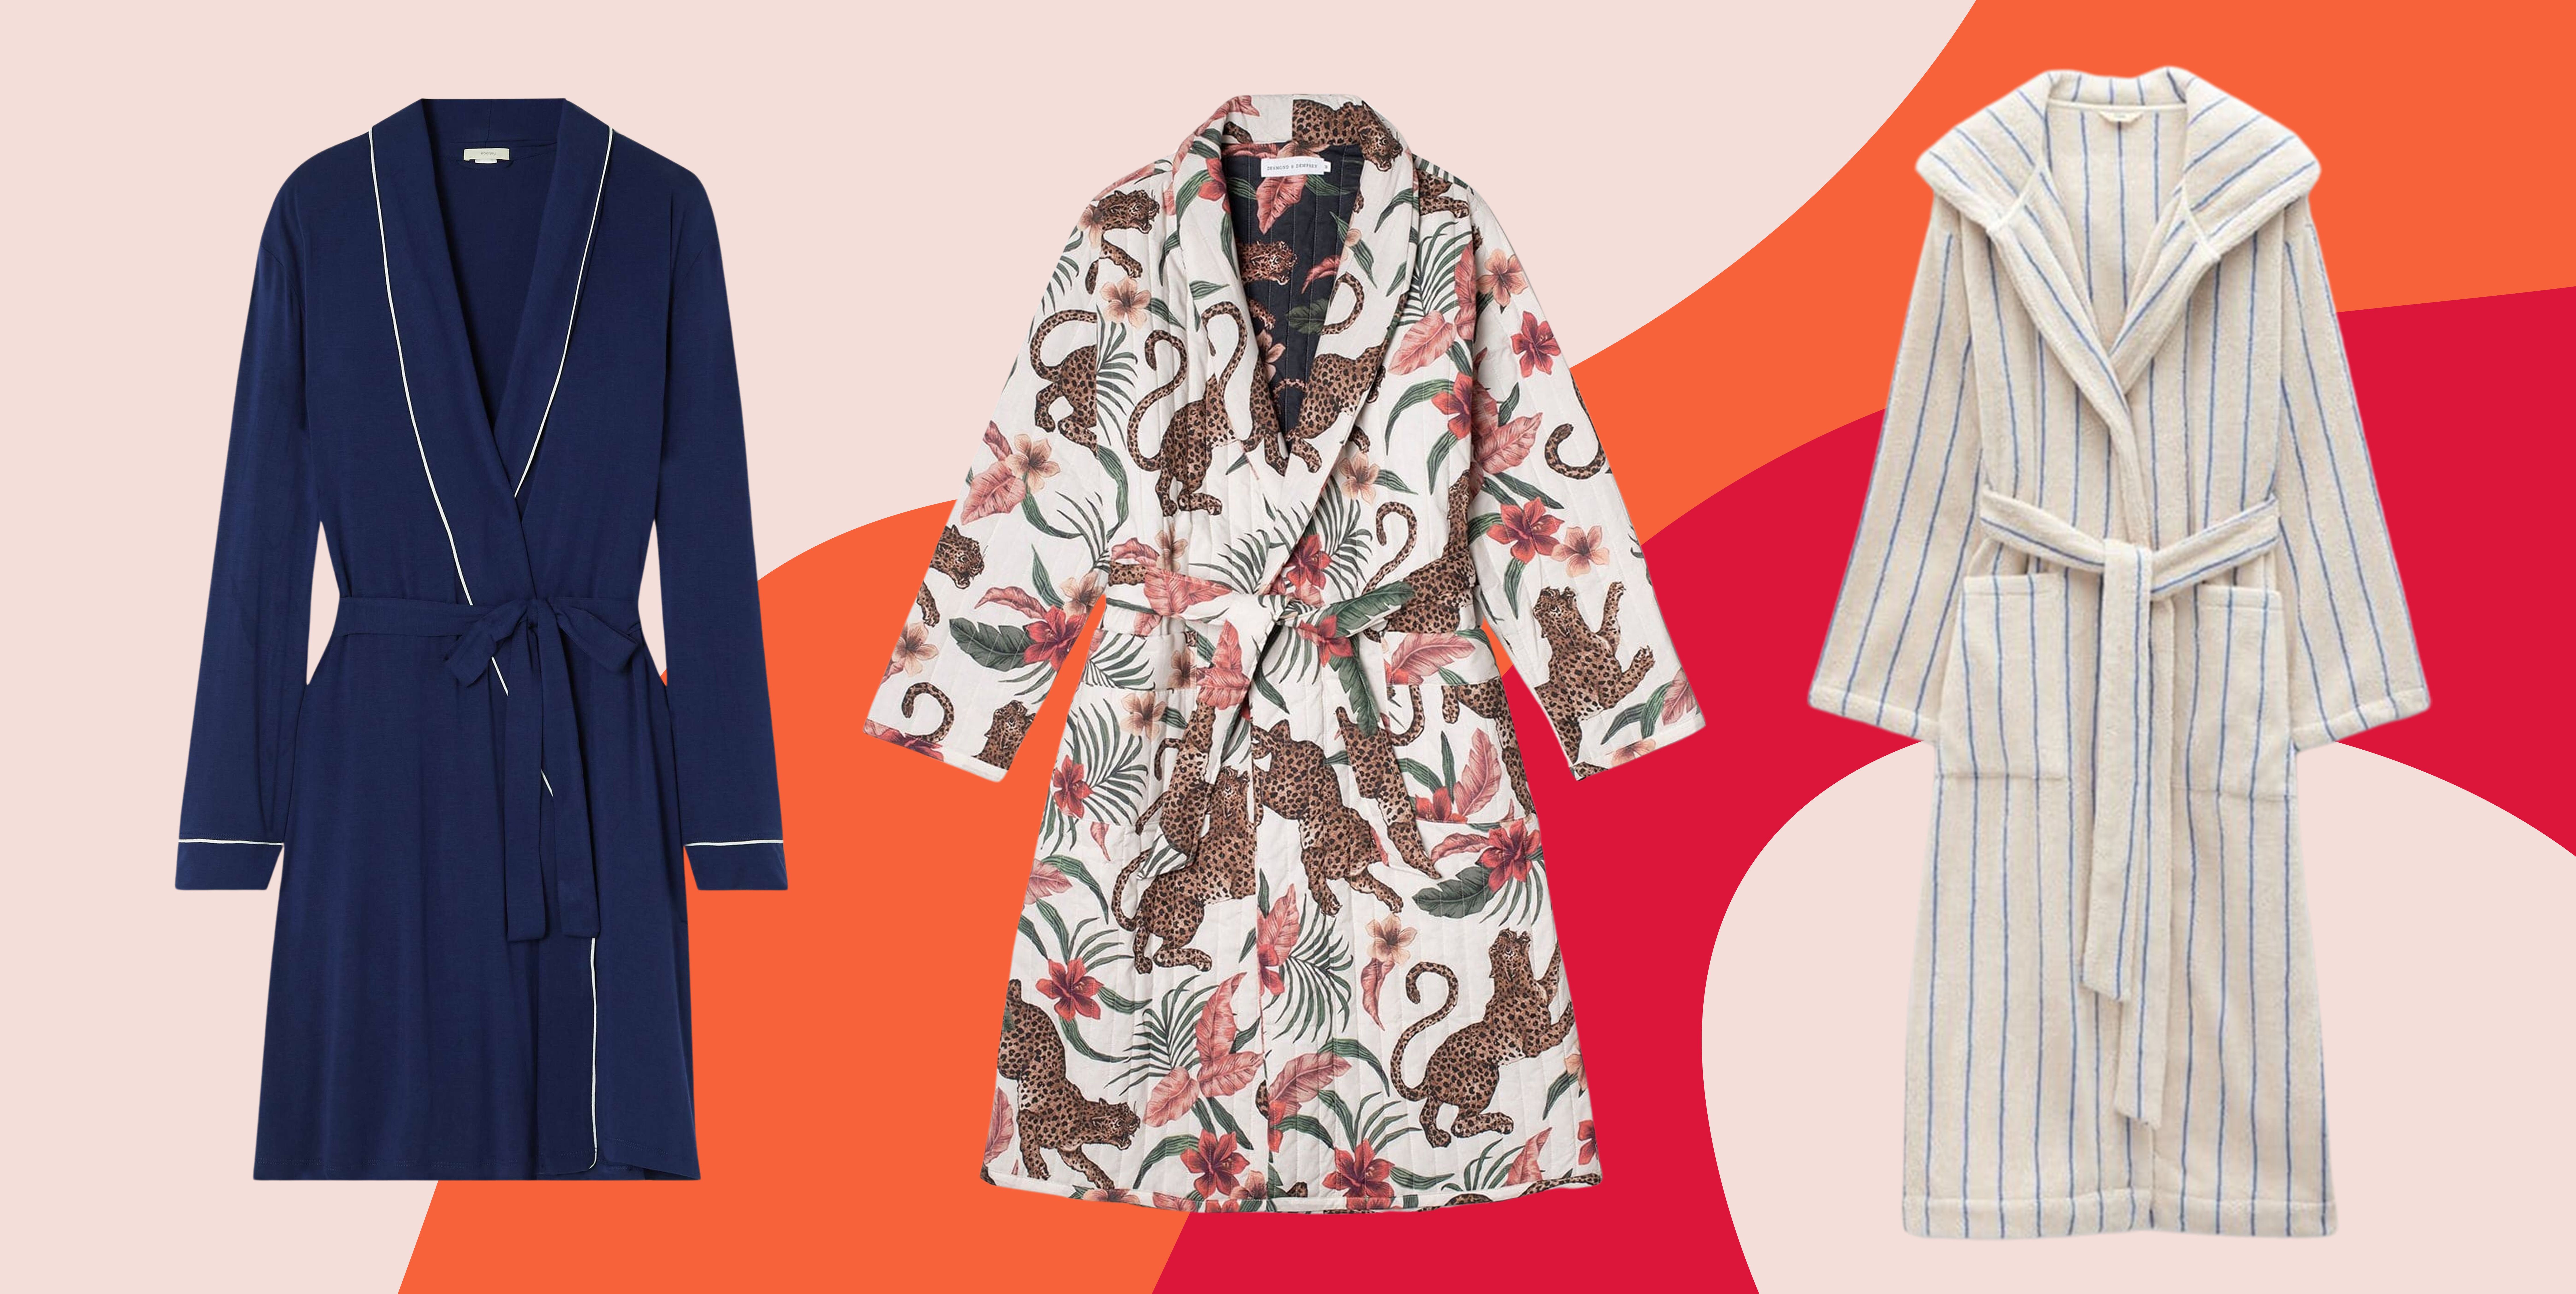 Women's Dressing Gowns & Robes | Camille